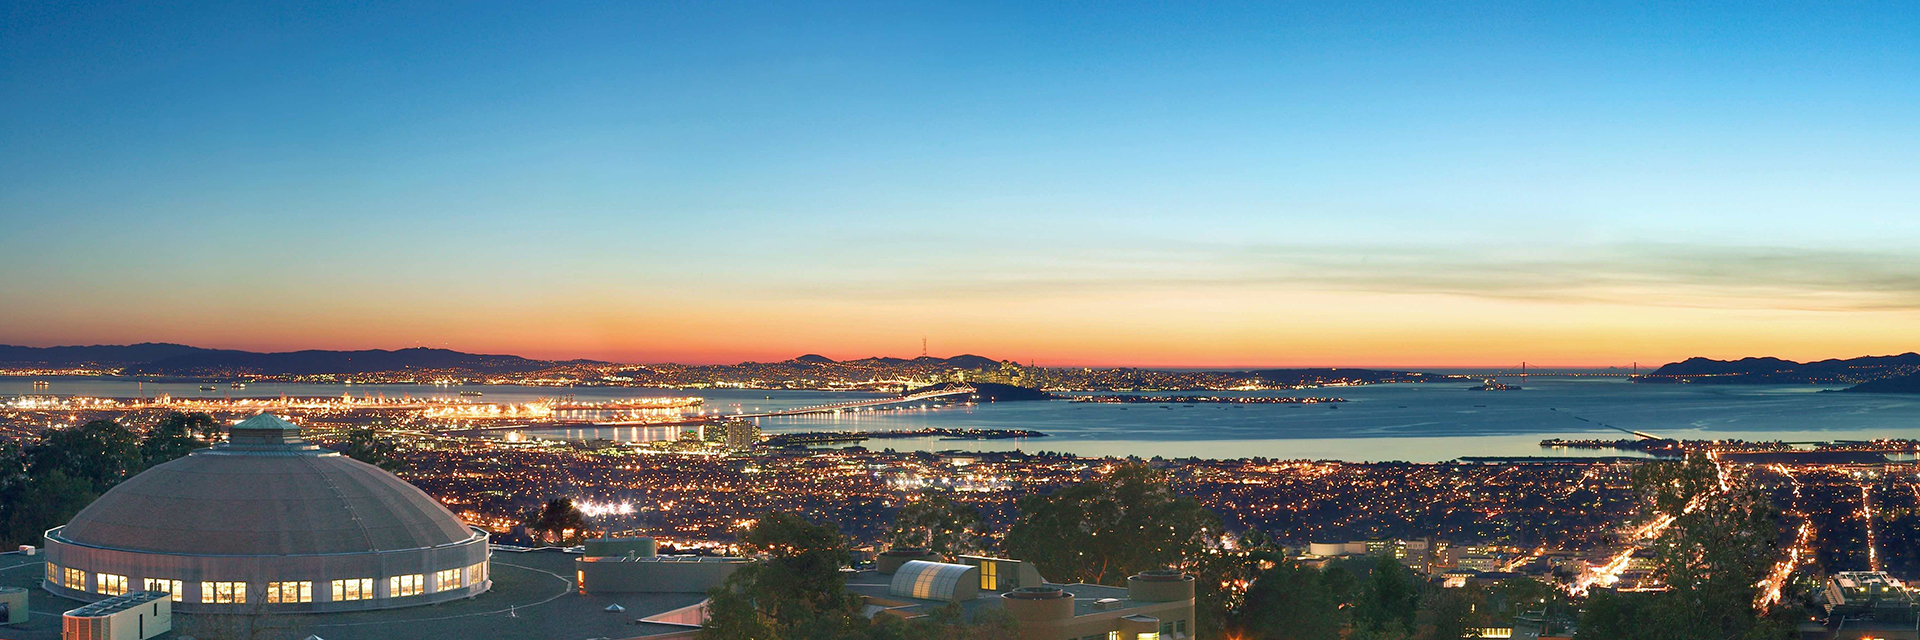 View from Lawrence Berkeley National Lab looking towards San Francisco Bay at sunset